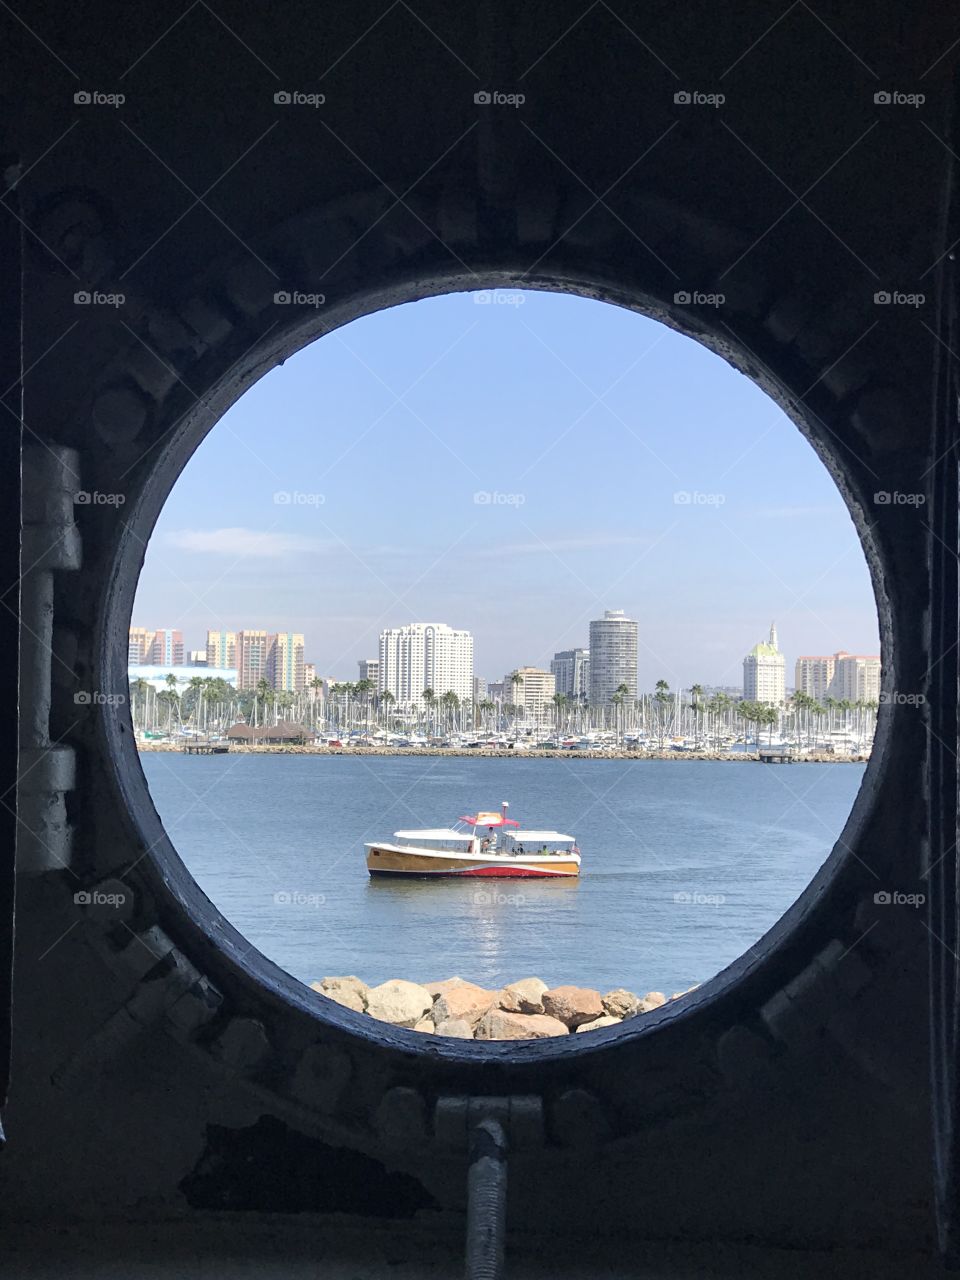 Boat as seen from a porthole of the Queen Mary